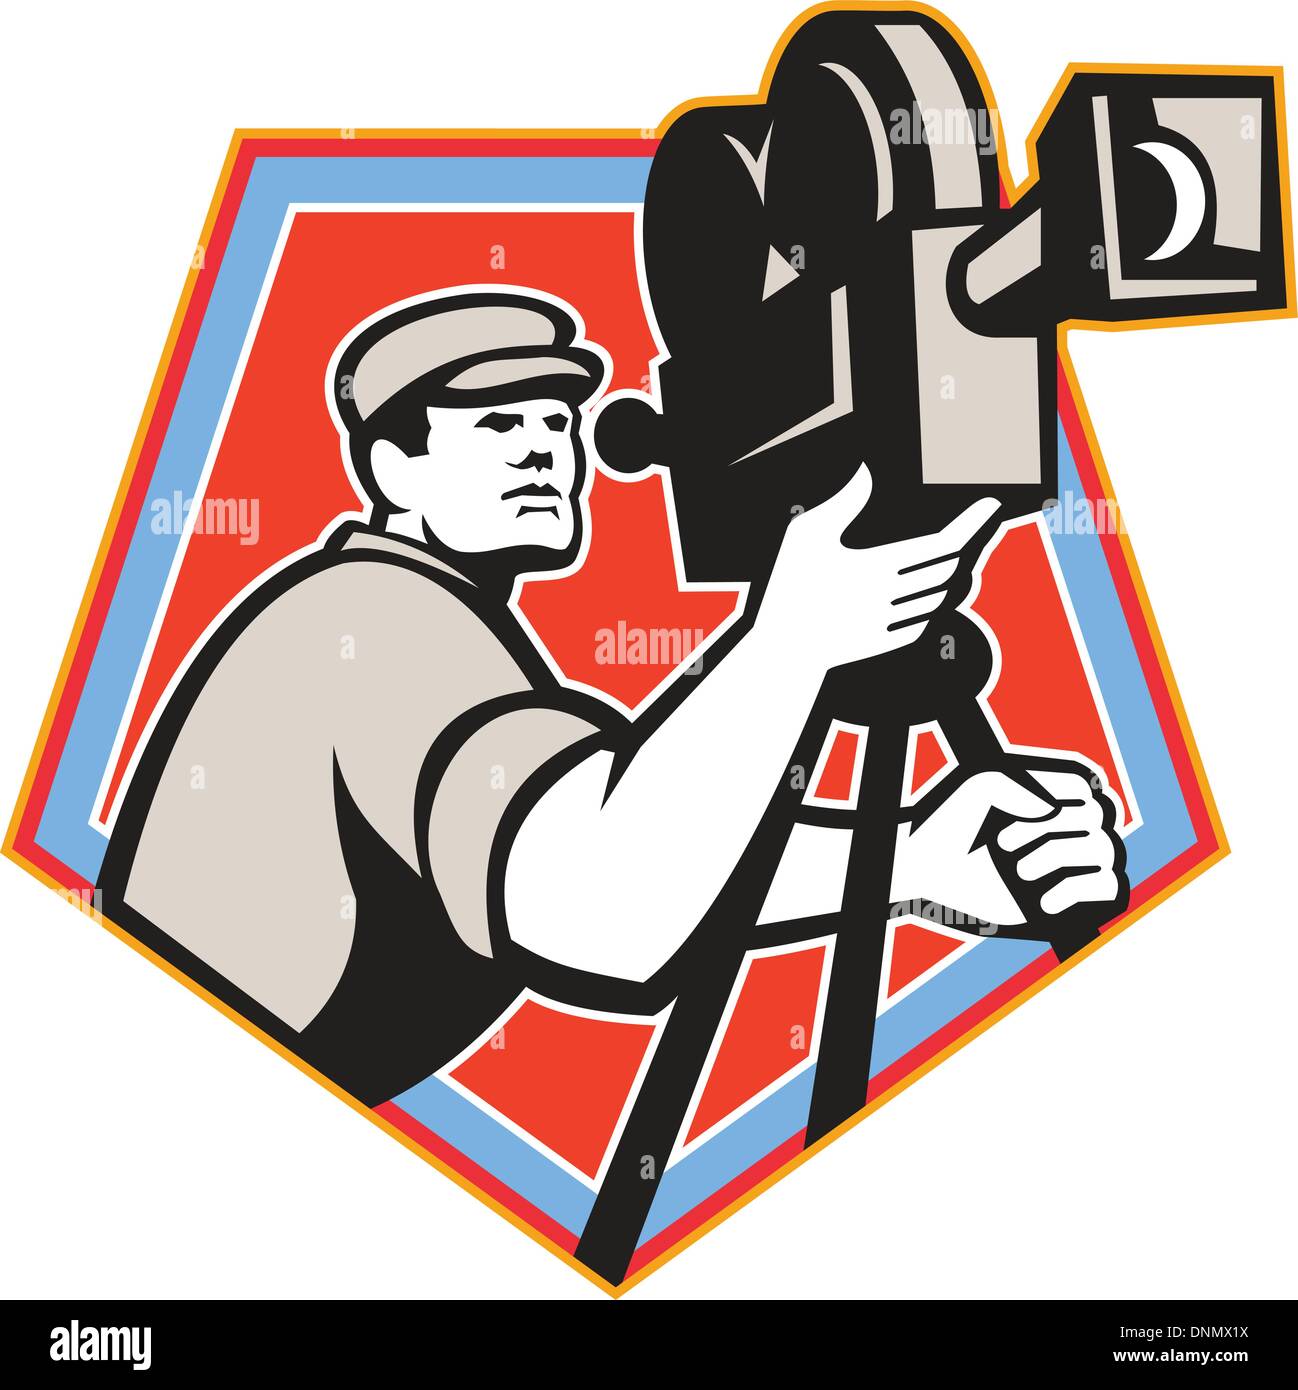 Illustration of a cameraman movie director shooting filming with vintage camera set inside shield crest done in retro style. Stock Vector